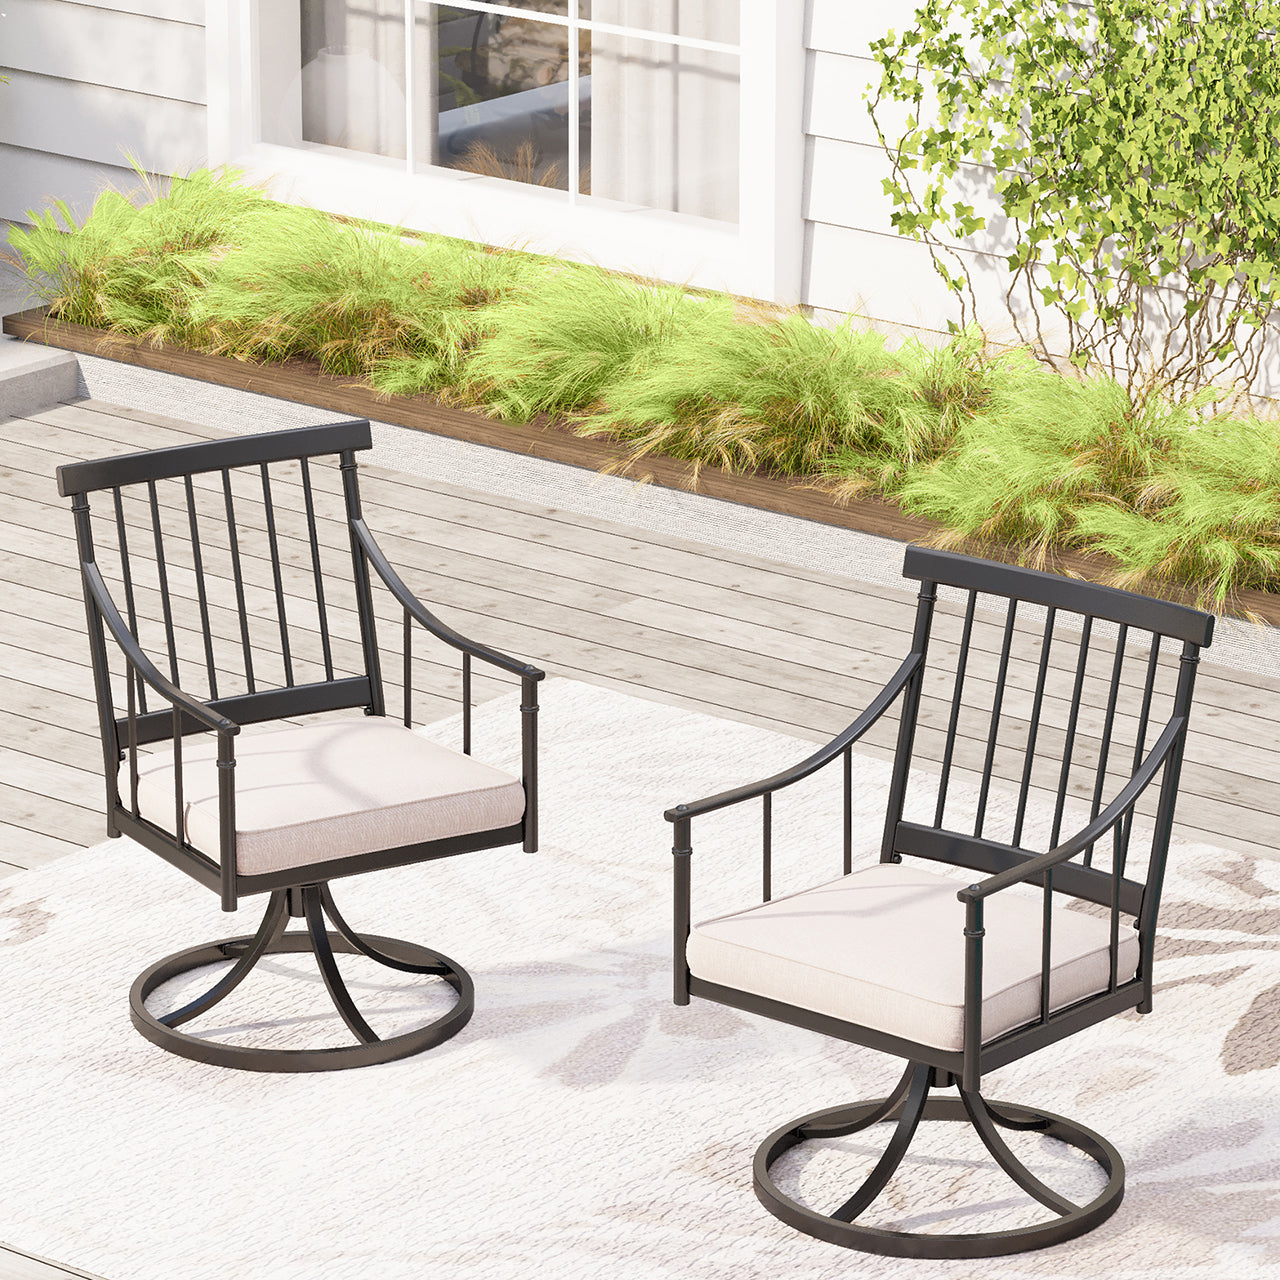 Sophia & William Outdoor Stylish Metal Swivel Dining Chairs with Cushion